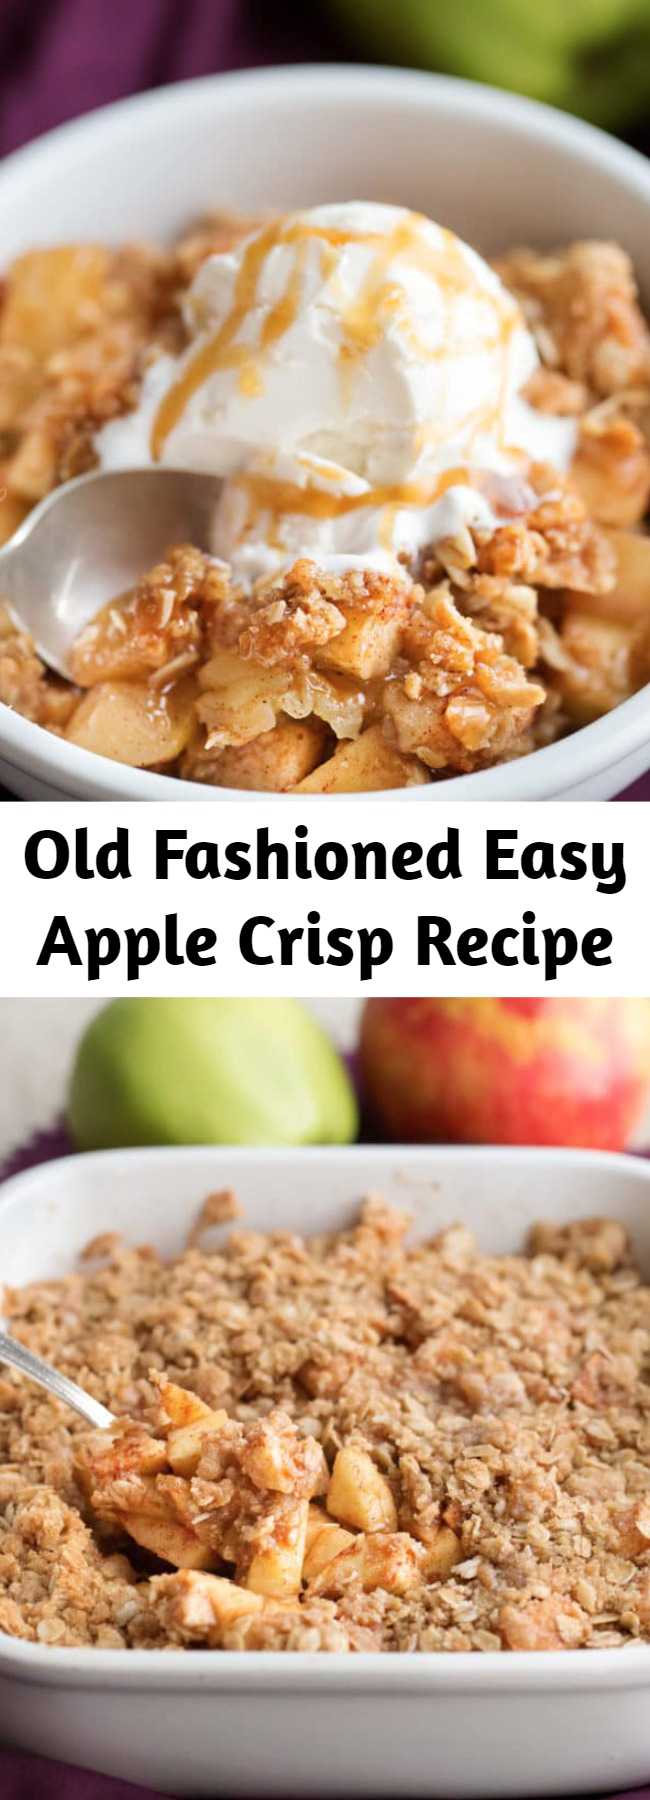 Old Fashioned Easy Apple Crisp Recipe - This easy apple crisp is made the old fashioned way like Grandma used to make, and is perfect with a scoop of vanilla ice cream and salted caramel sauce! #applecrisp #crisp #apples #fall #baking #dessert #recipe